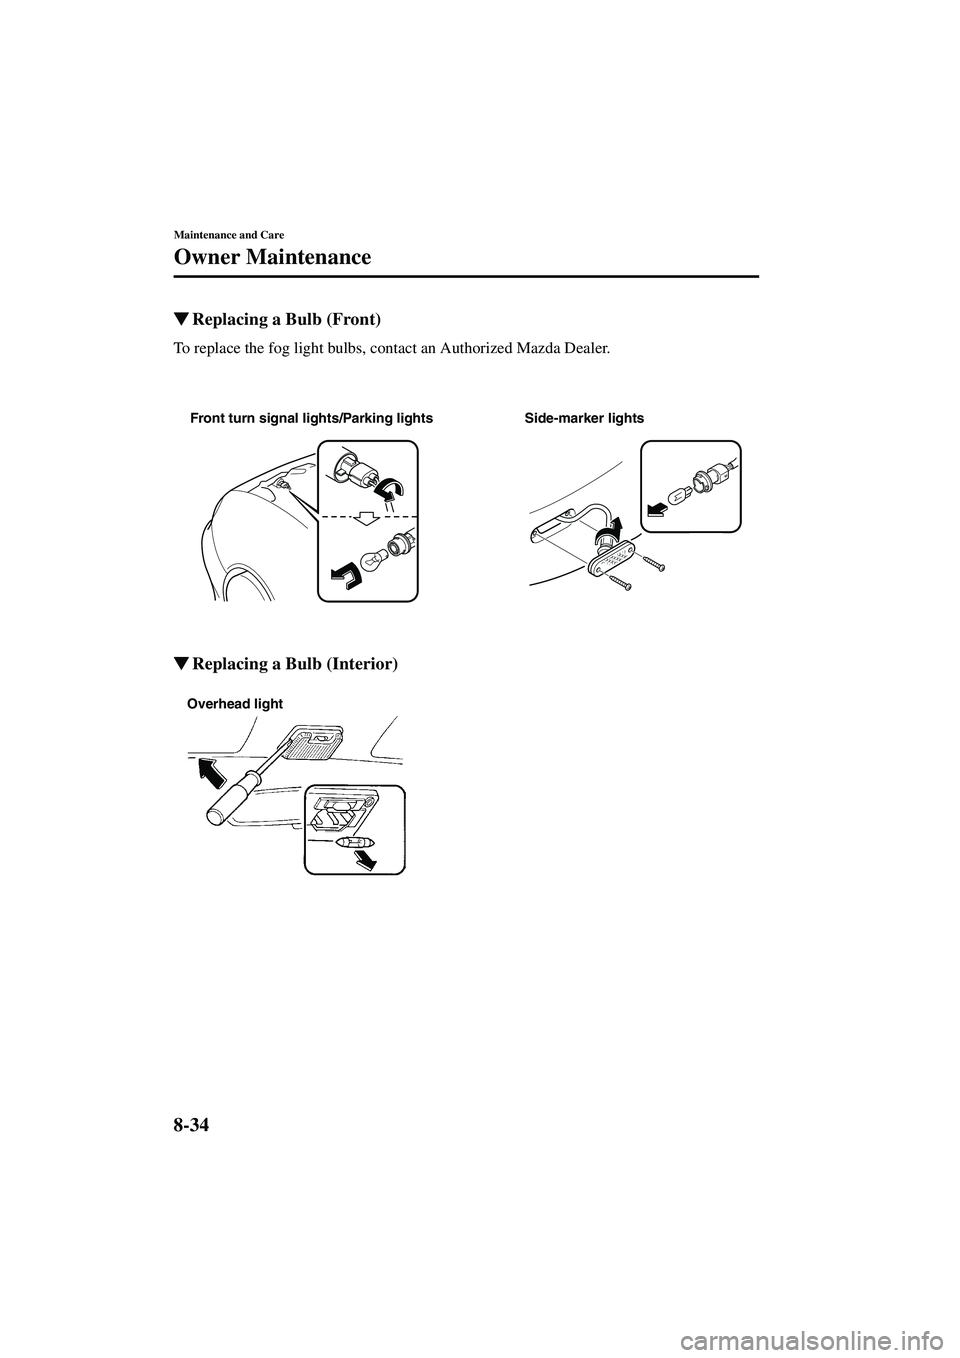 MAZDA MODEL MX-5 MIATA 2003  Owners Manual 8-34
Maintenance and Care
Owner Maintenance
Form No. 8R09-EA-02G
Replacing a Bulb (Front)
To replace the fog light bulbs, contact an Authorized Mazda Dealer.
Replacing a Bulb (Interior)
Side-marker 